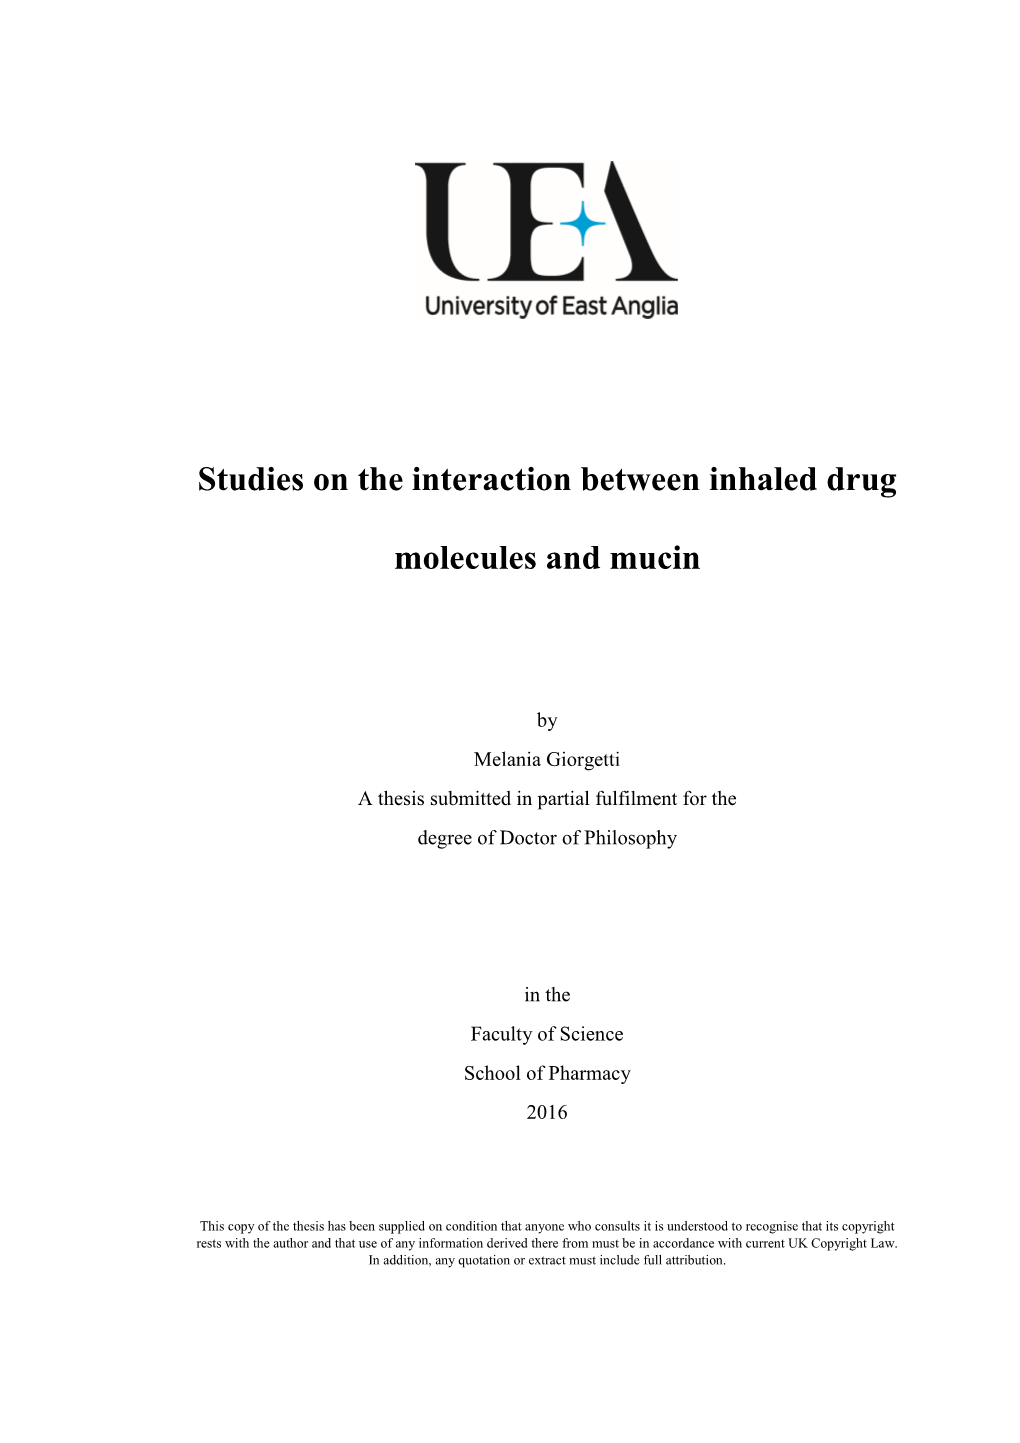 Studies on the Interaction Between Inhaled Drug Molecules and Mucin